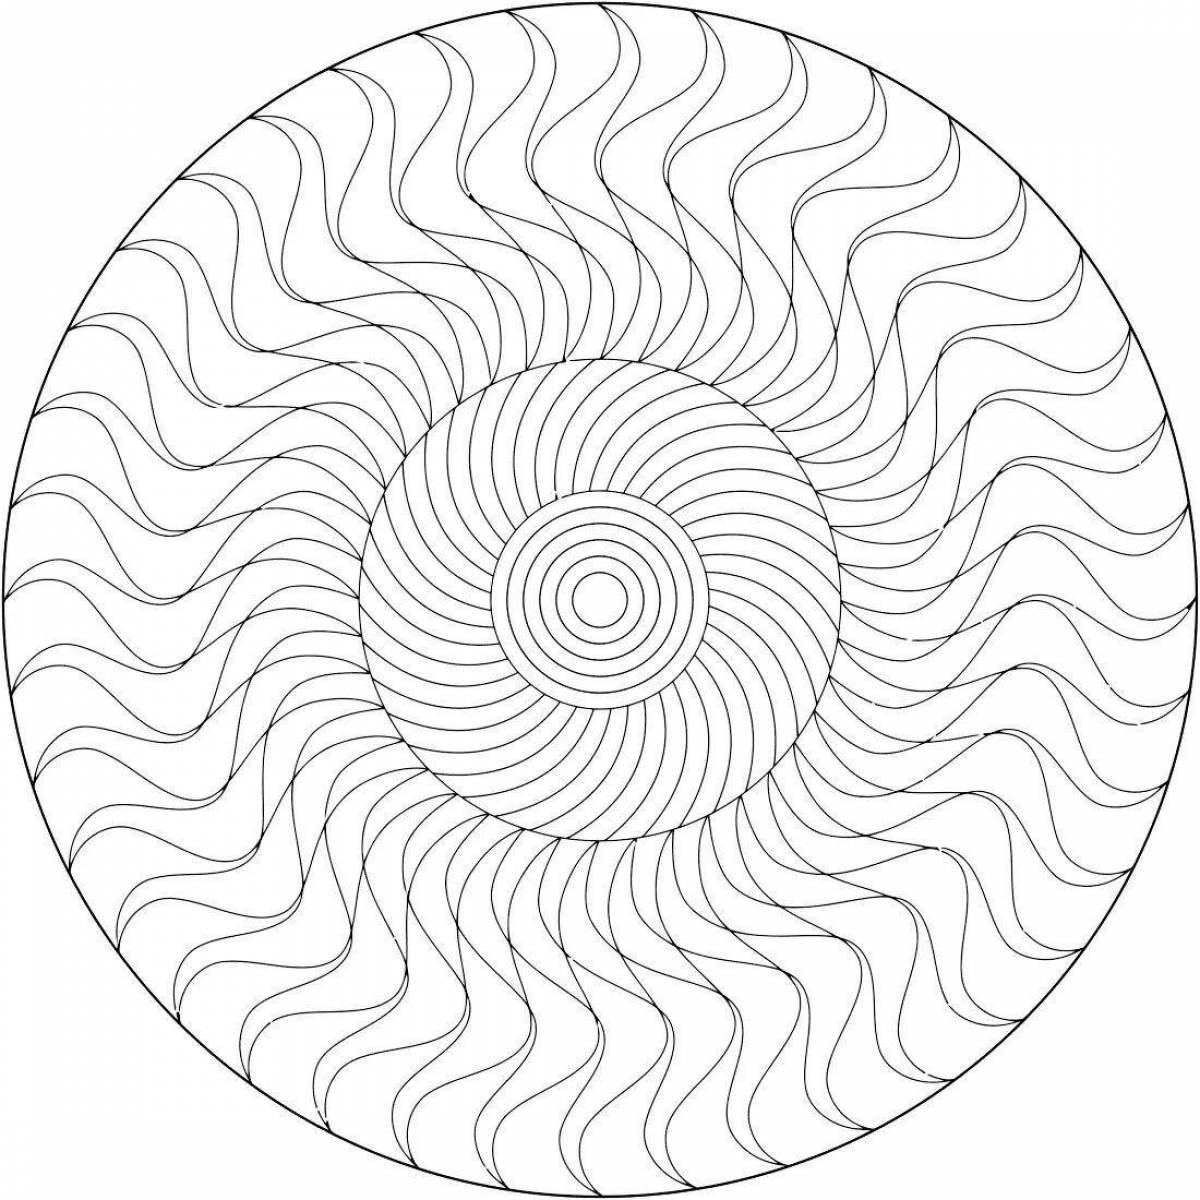 Curved spiral coloring page